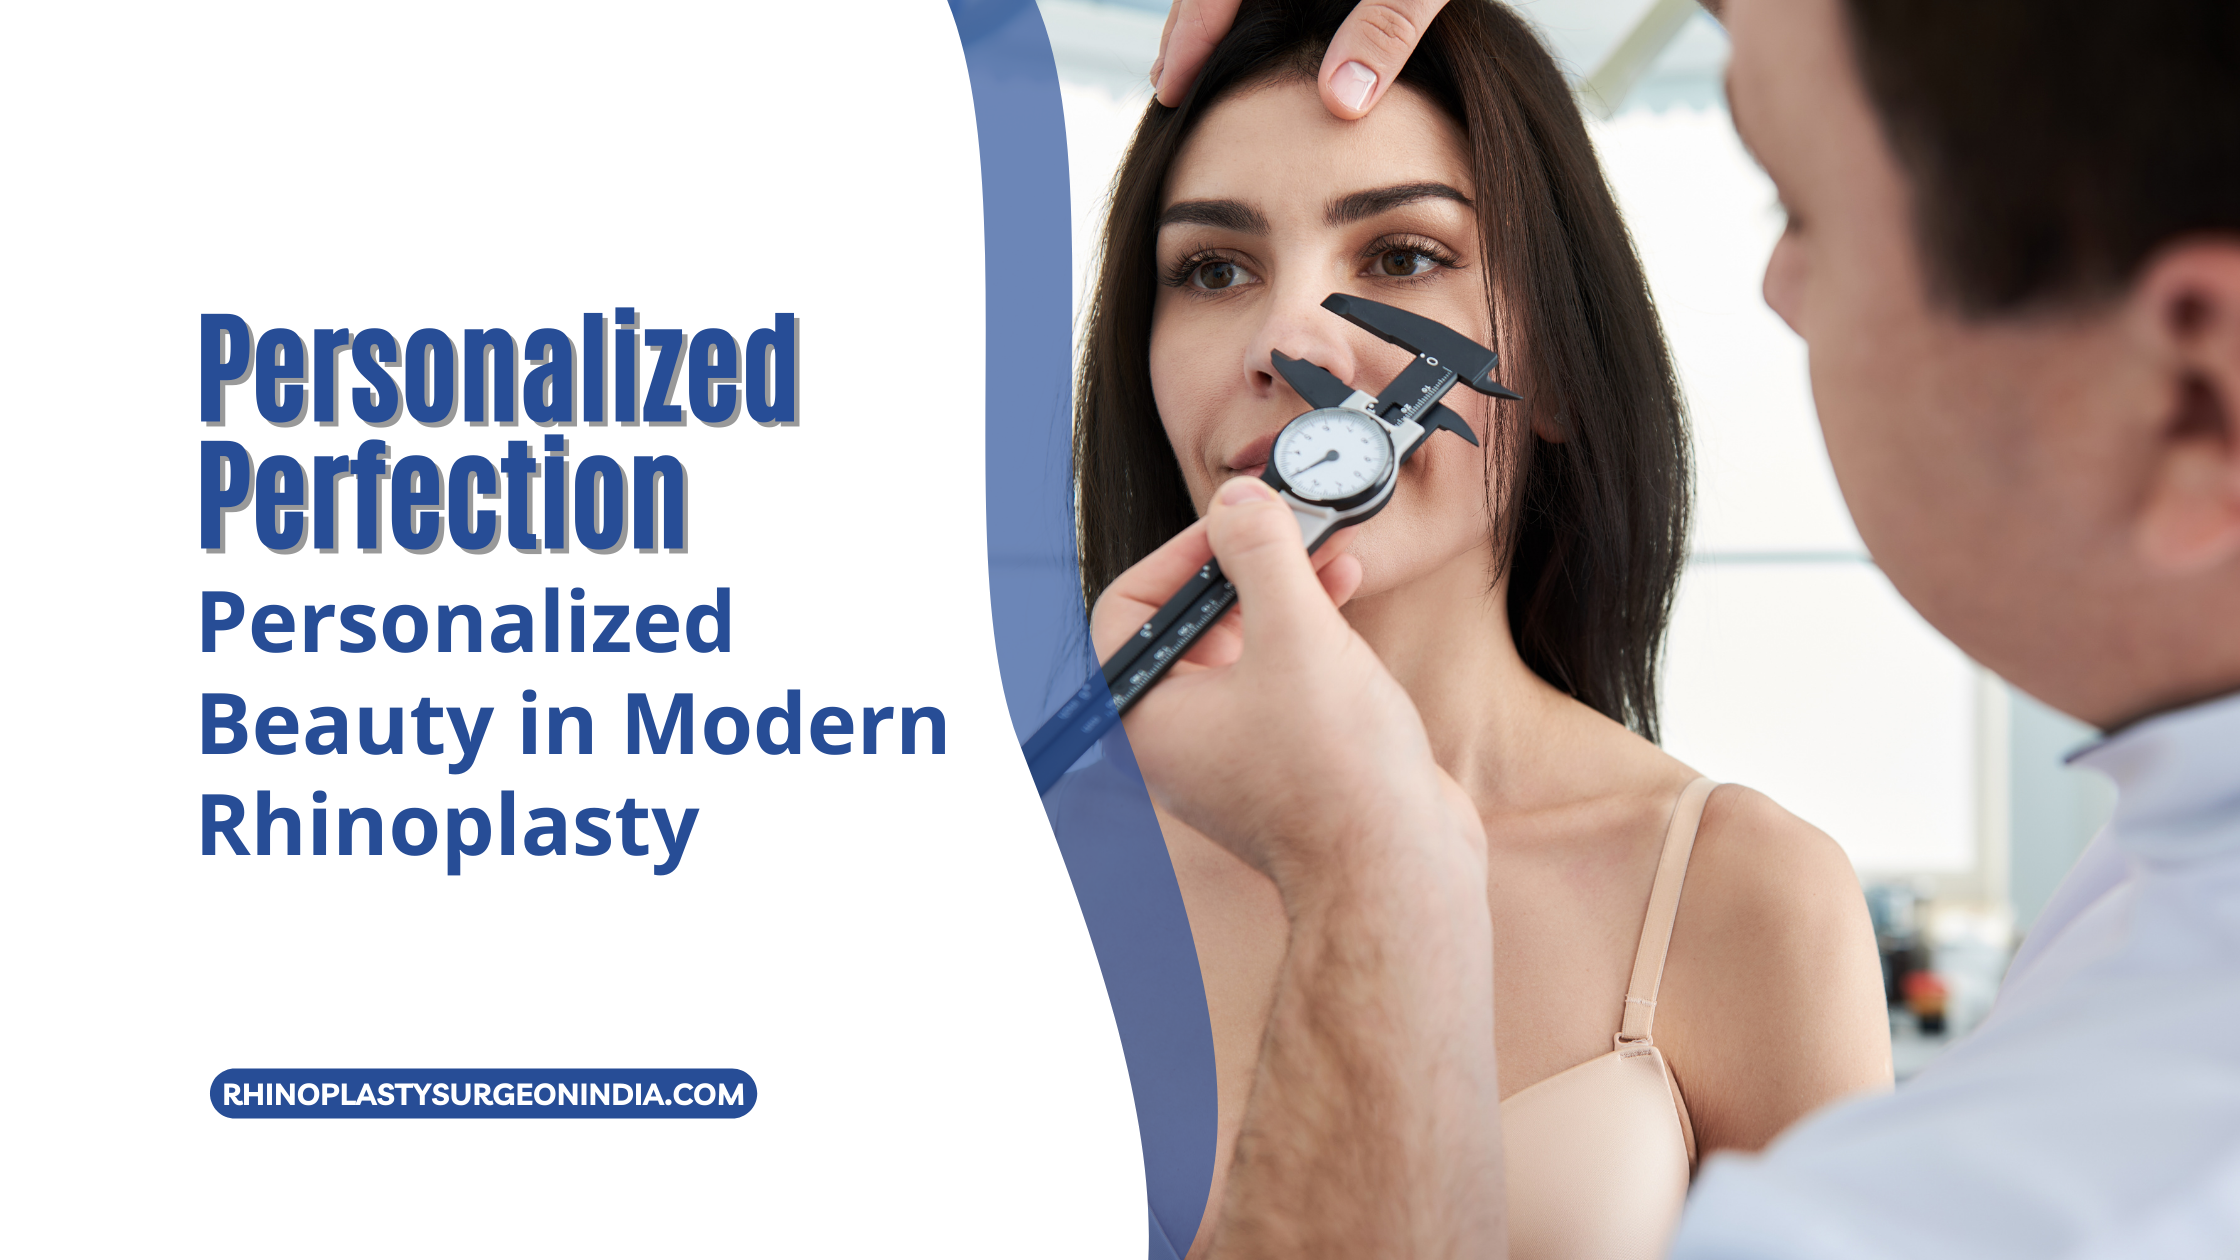 Personalized Perfection: Personalized Beauty in Modern Rhinoplasty